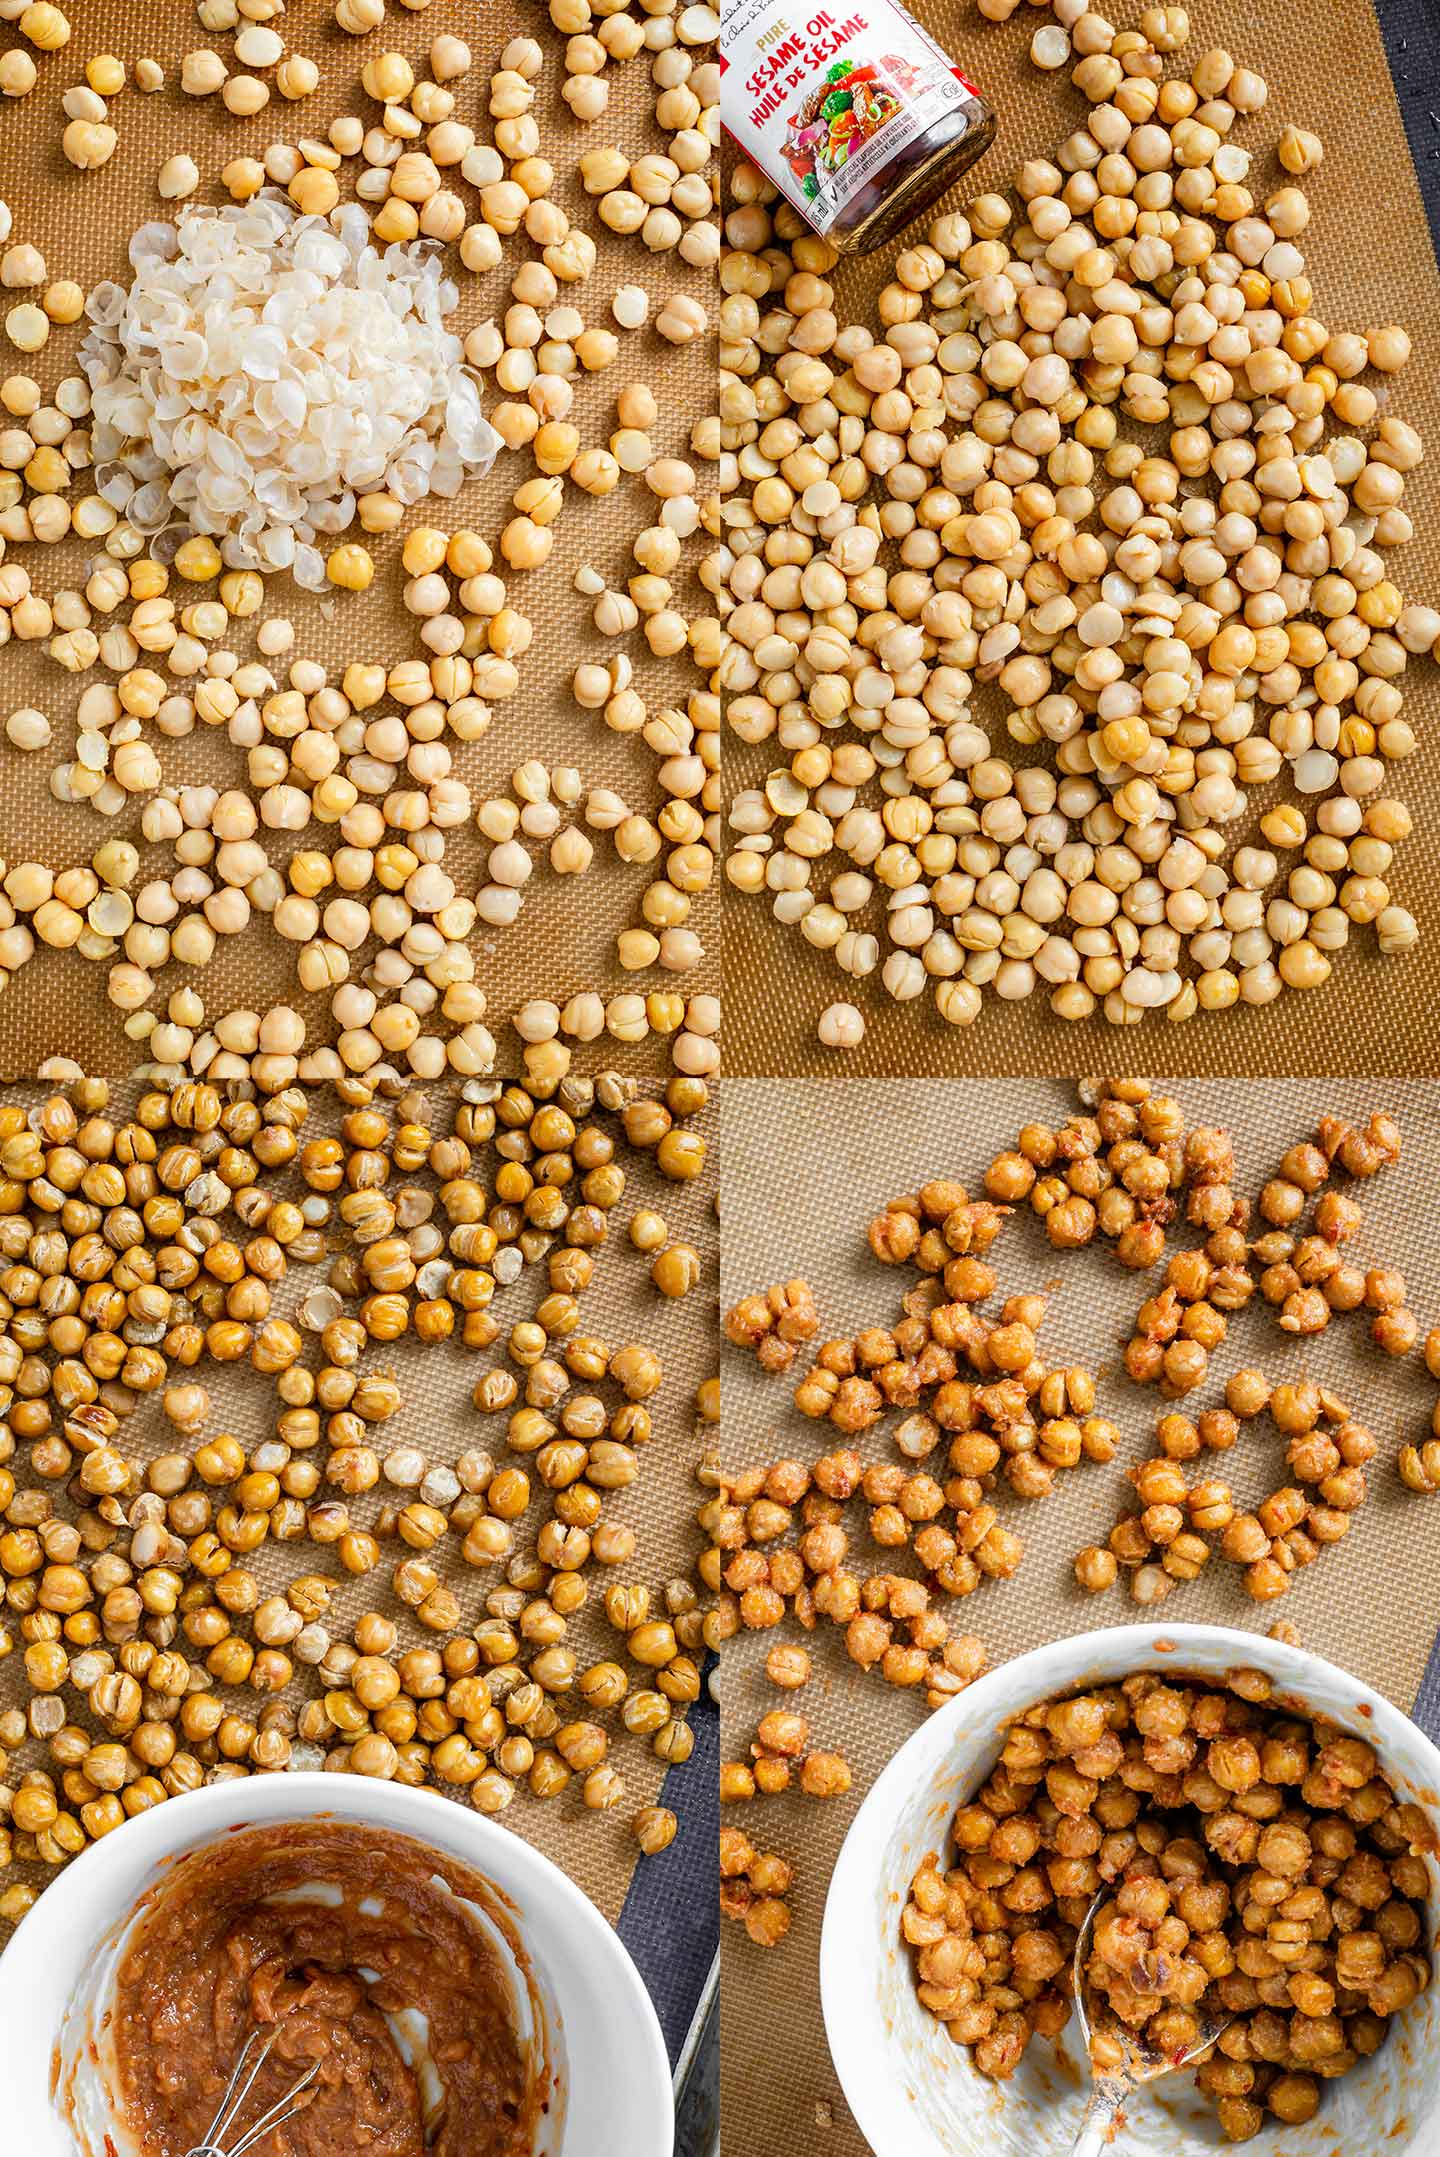 Grid of four process photos. The thin skins are removed from the chickpeas, they are tossed in sesame oil. Then they are roasted and the dressing is prepared. Finally they covered in the dressing.